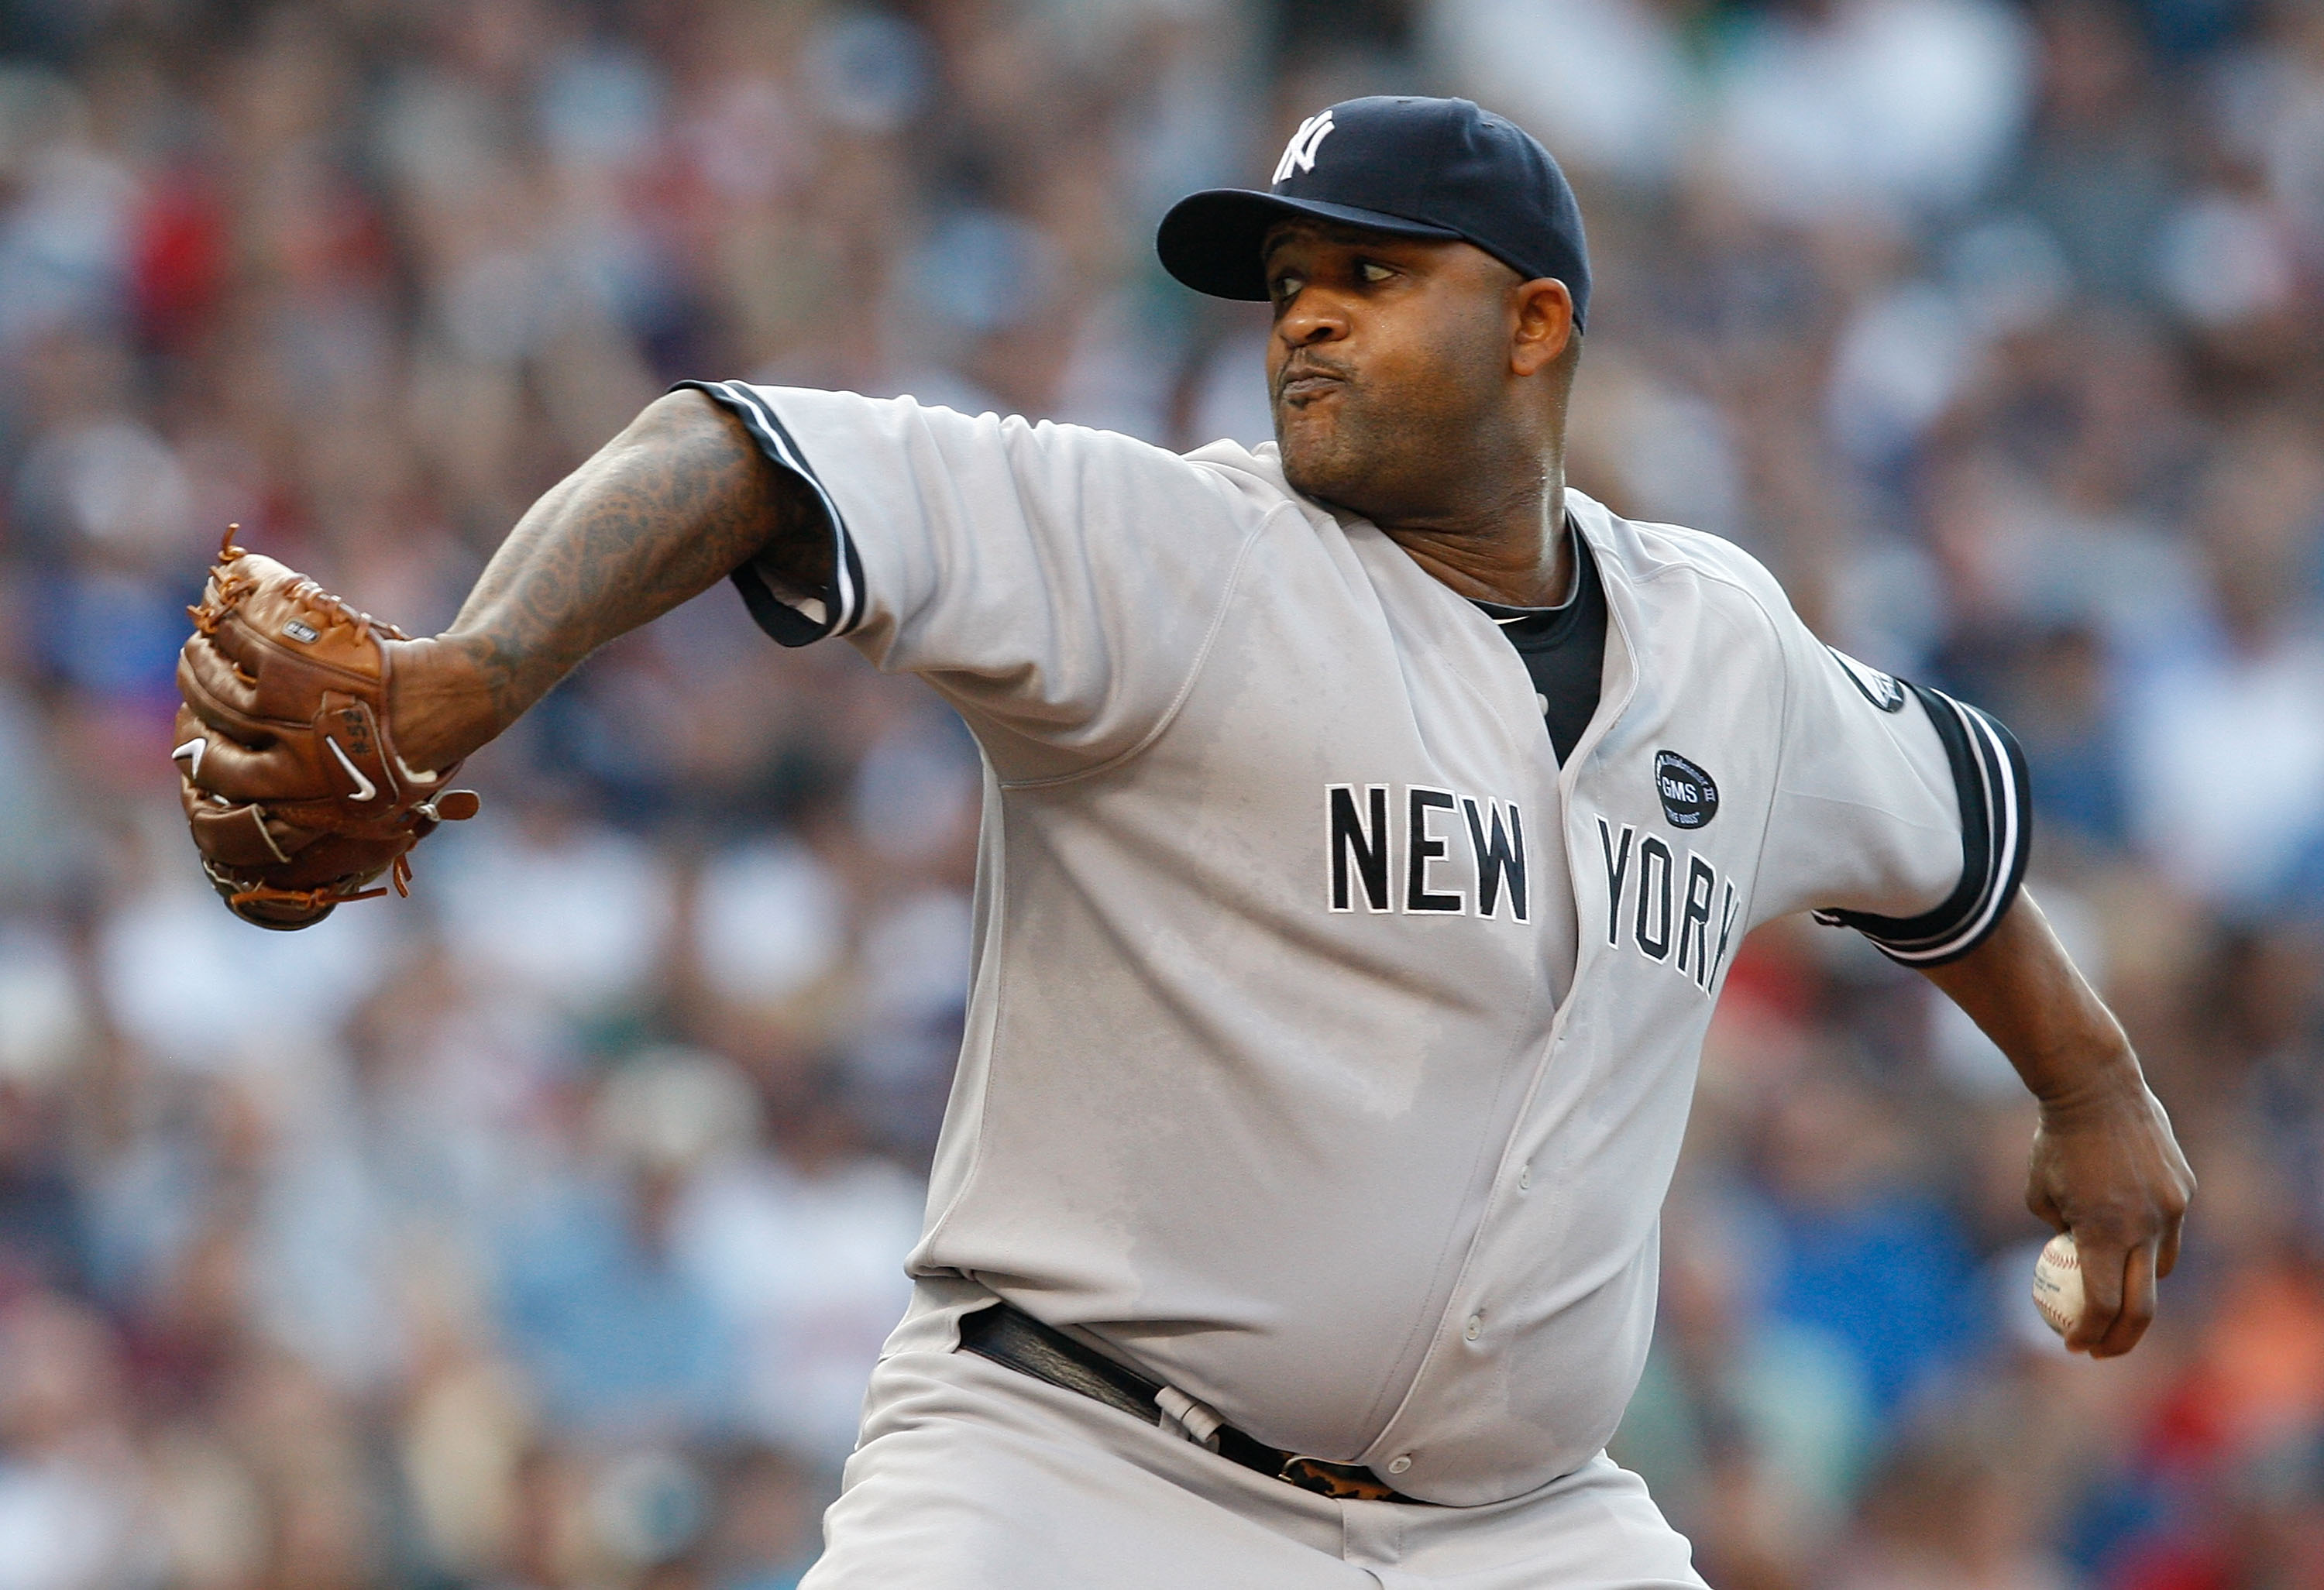 CLEVELAND - JULY 27:  CC Sabathia #52 of the New York Yankees pitches against the Cleveland Indians during the game on July 27, 2010 at Progressive Field in Cleveland, Ohio.  (Photo by Jared Wickerham/Getty Images)